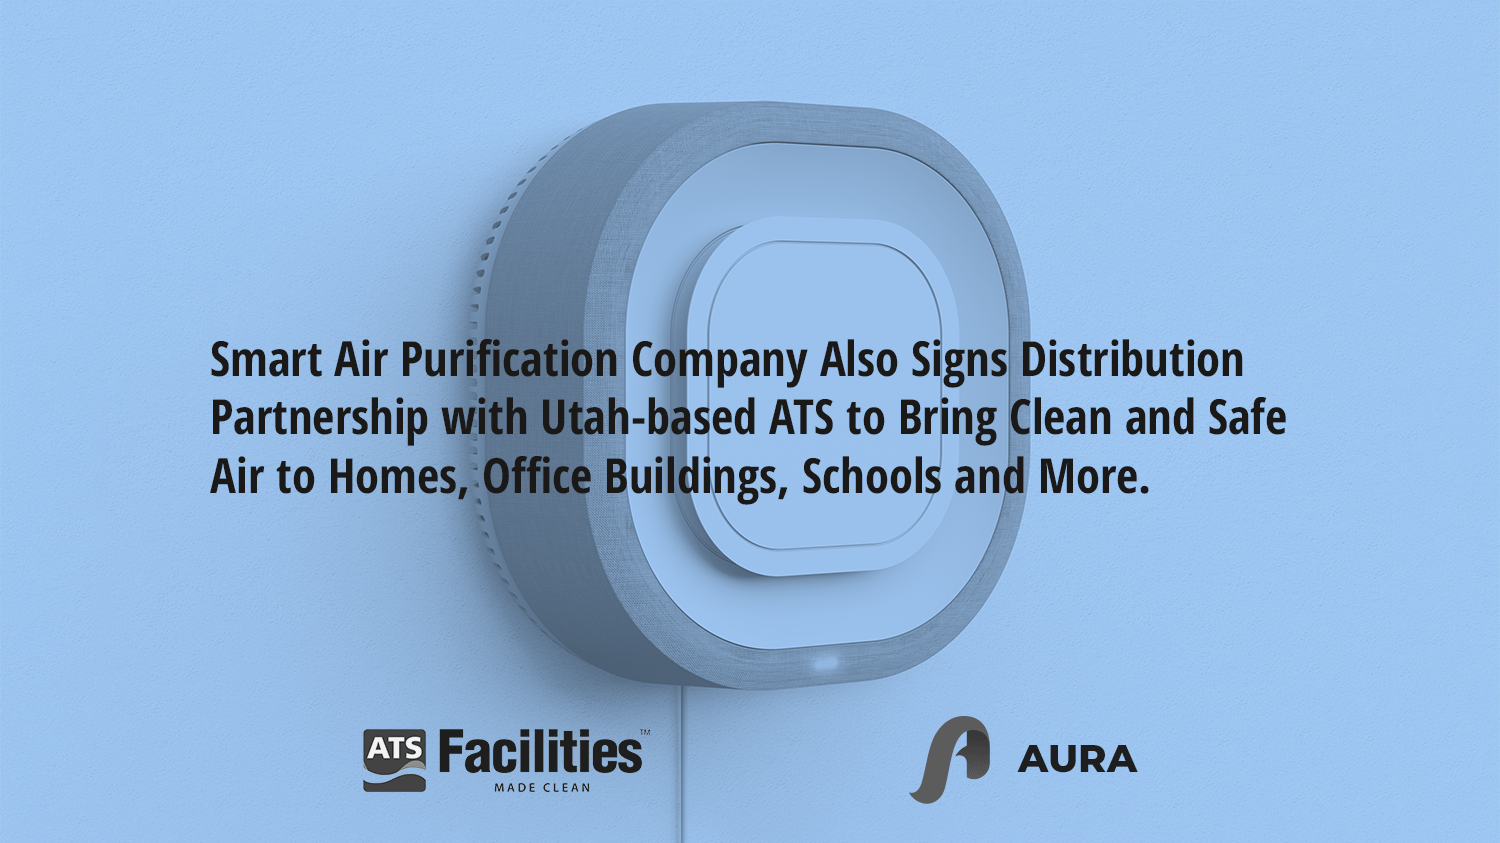 Header image which reads, "Smart Air Purification Company Also Signs Distribution Partnership with Utah-based ATS to Bring Clean and Safe Air to Homes, Office Buildings, Schools and More."